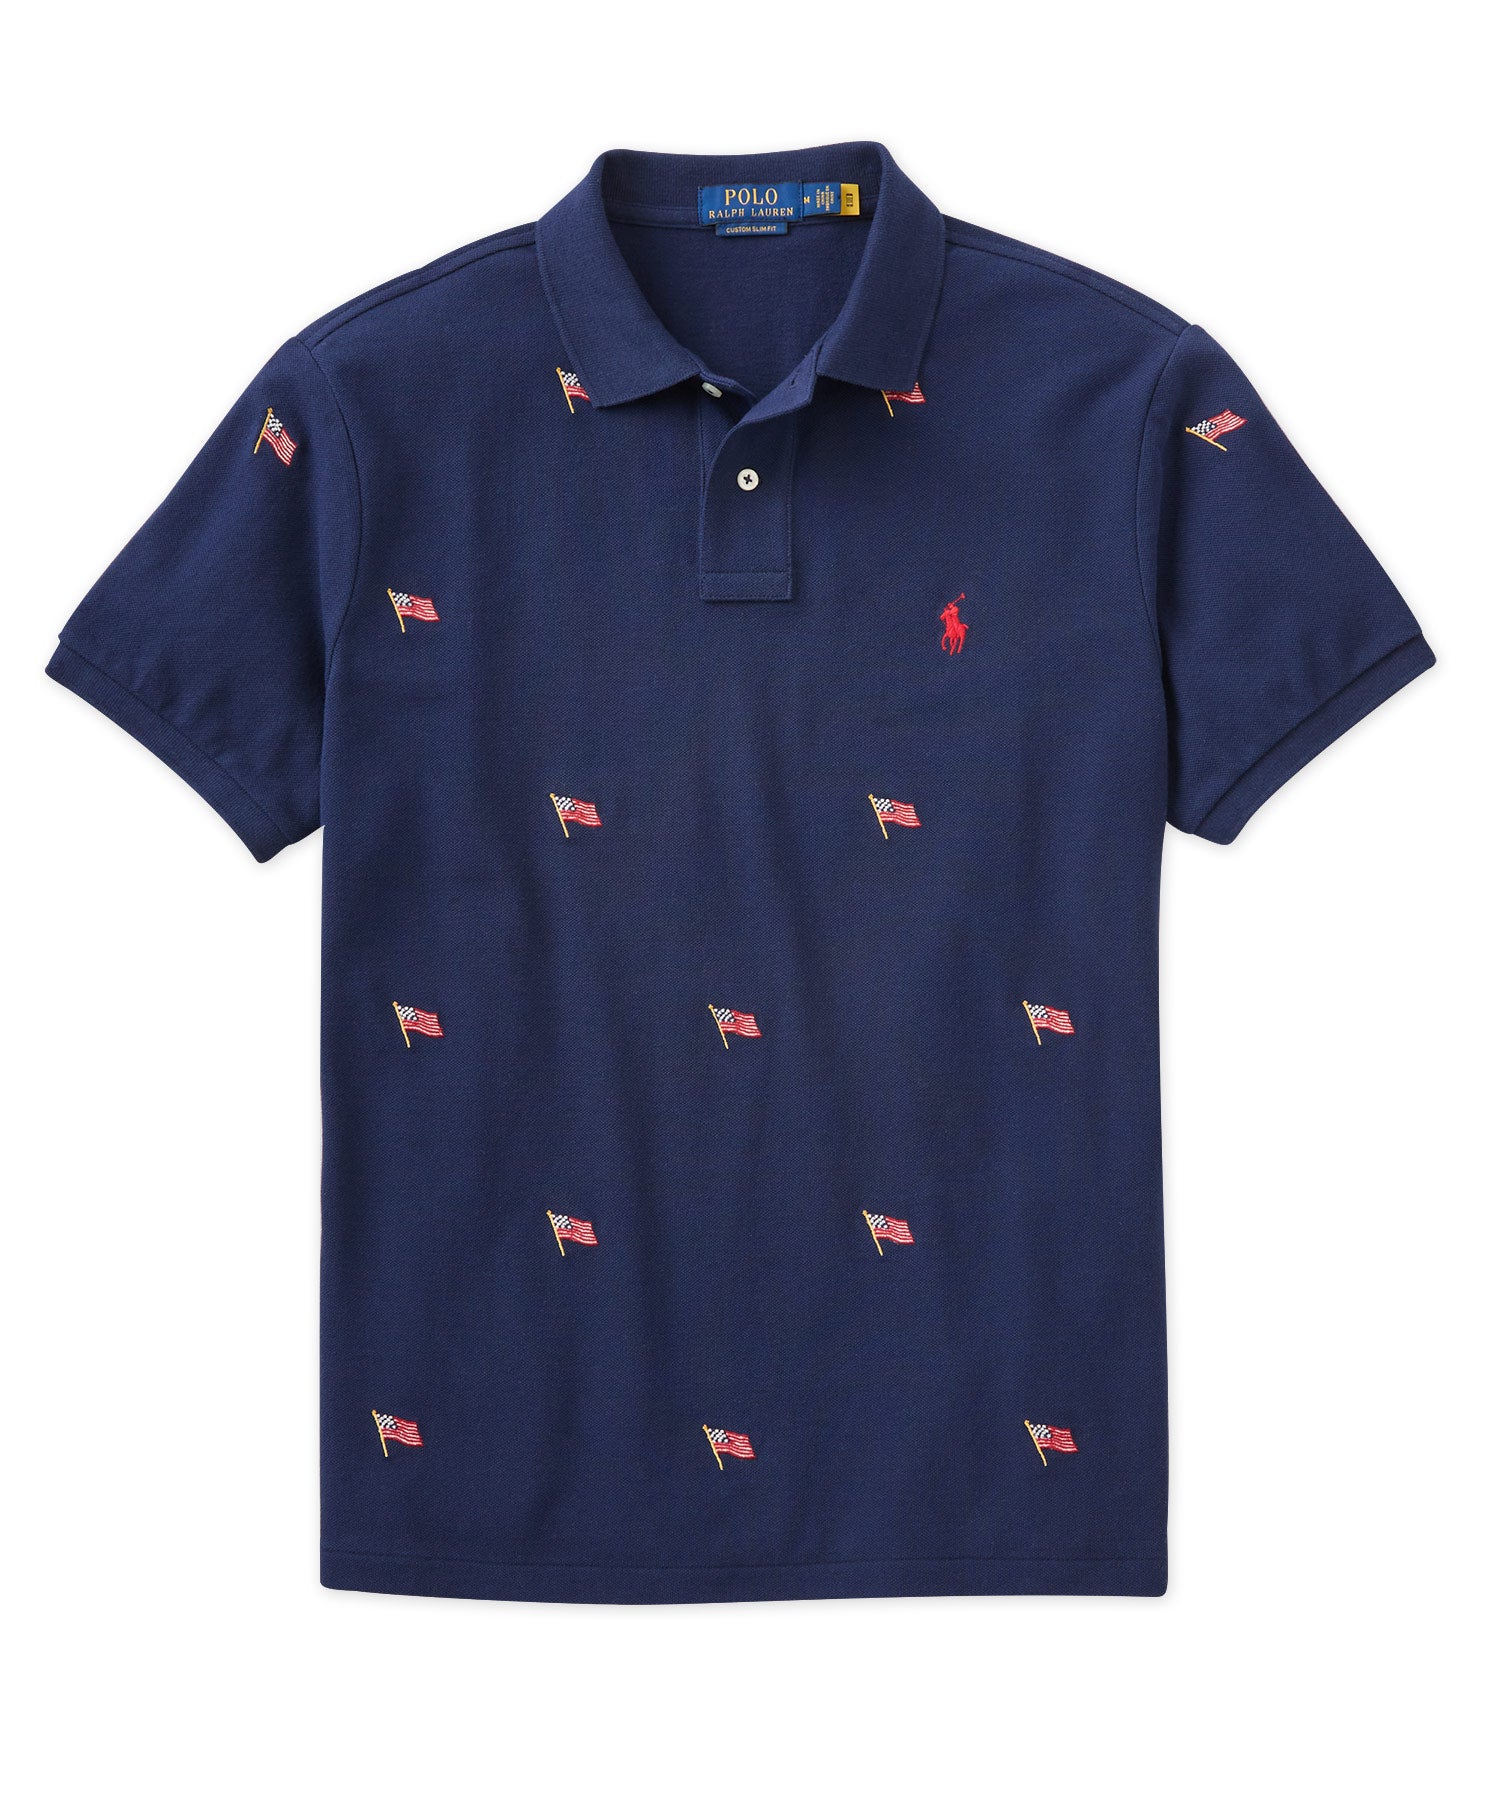 Polo Ralph Lauren Short Sleeve Embroidered Polo